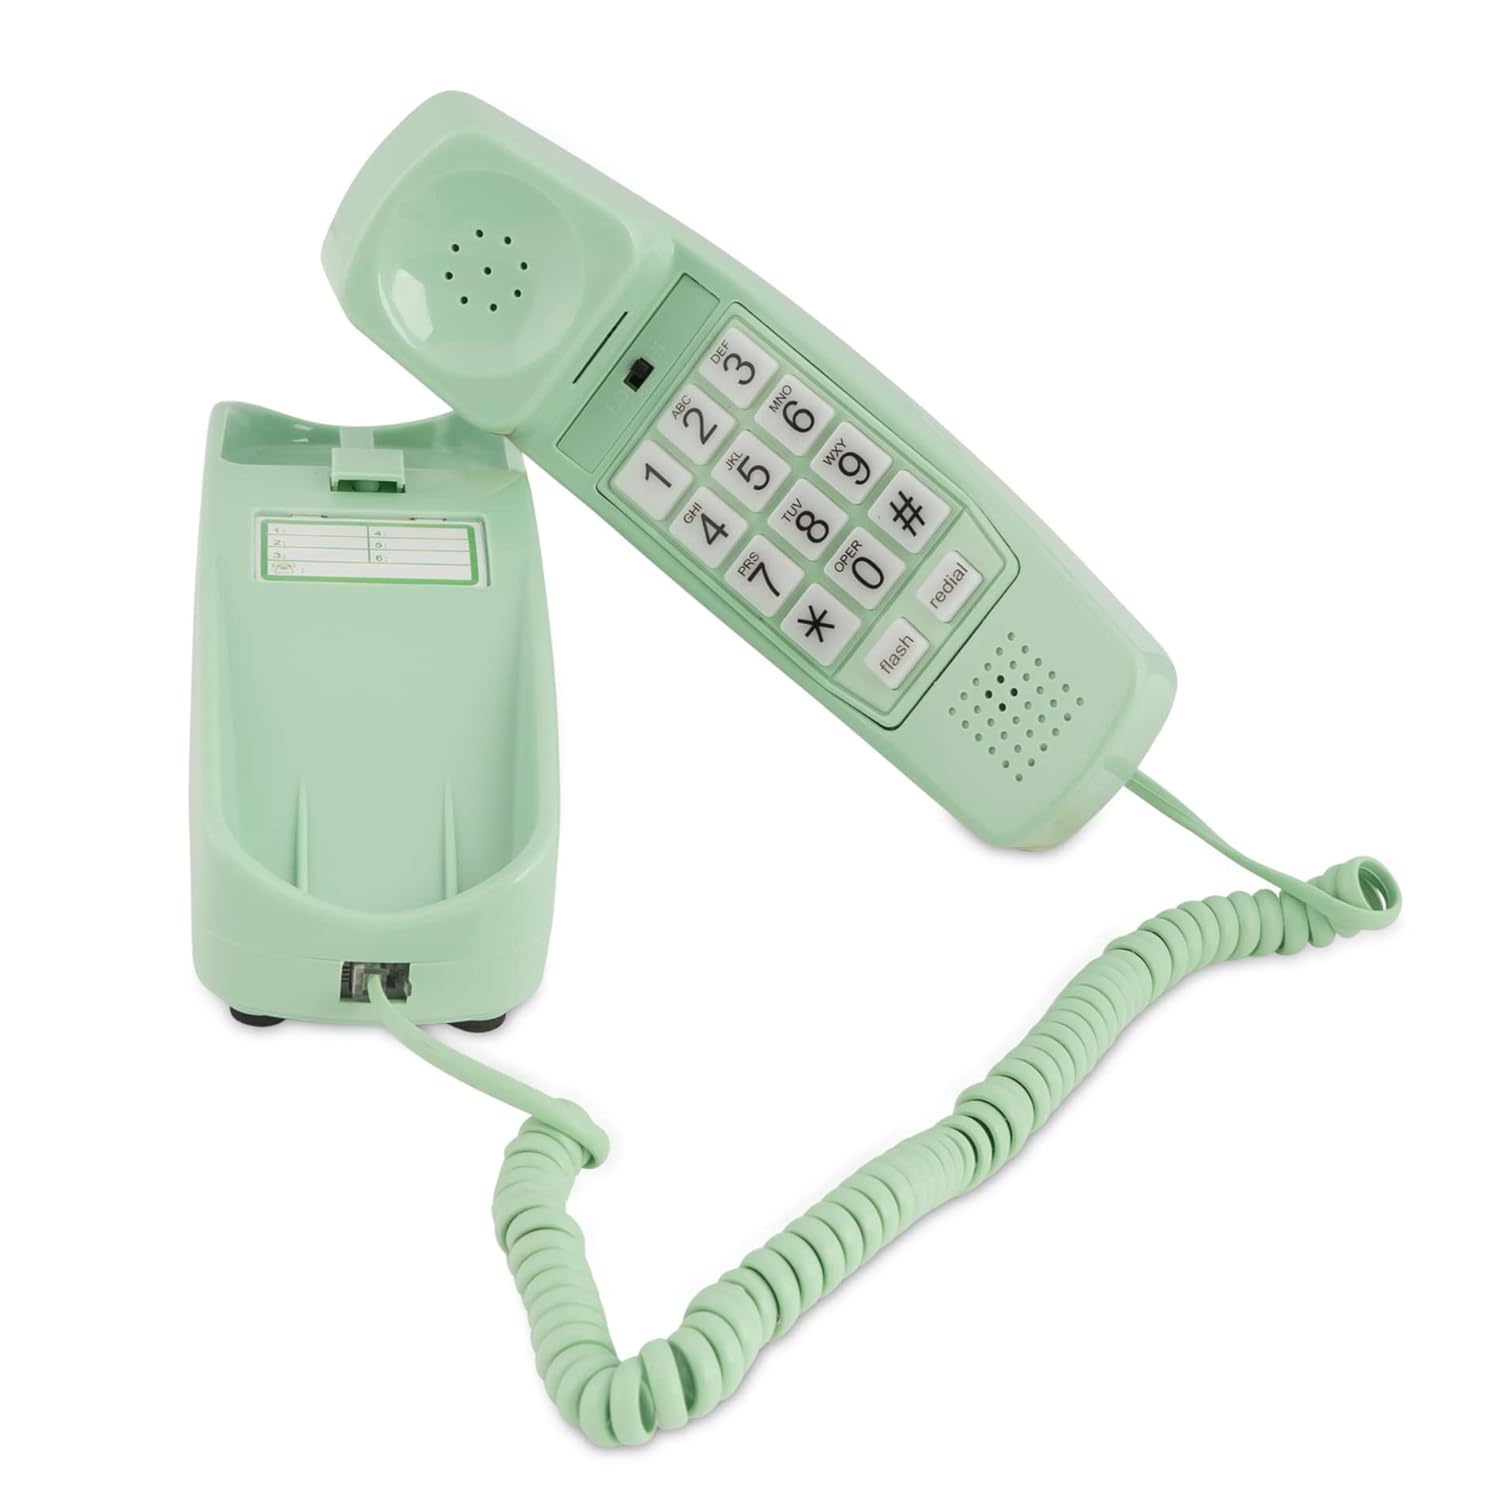 Great Choice Products Corded Phones For Landline - Premium Landline Phone For Seniors And Hearing Impaired, Old Phones From The 80S Design, Great O…